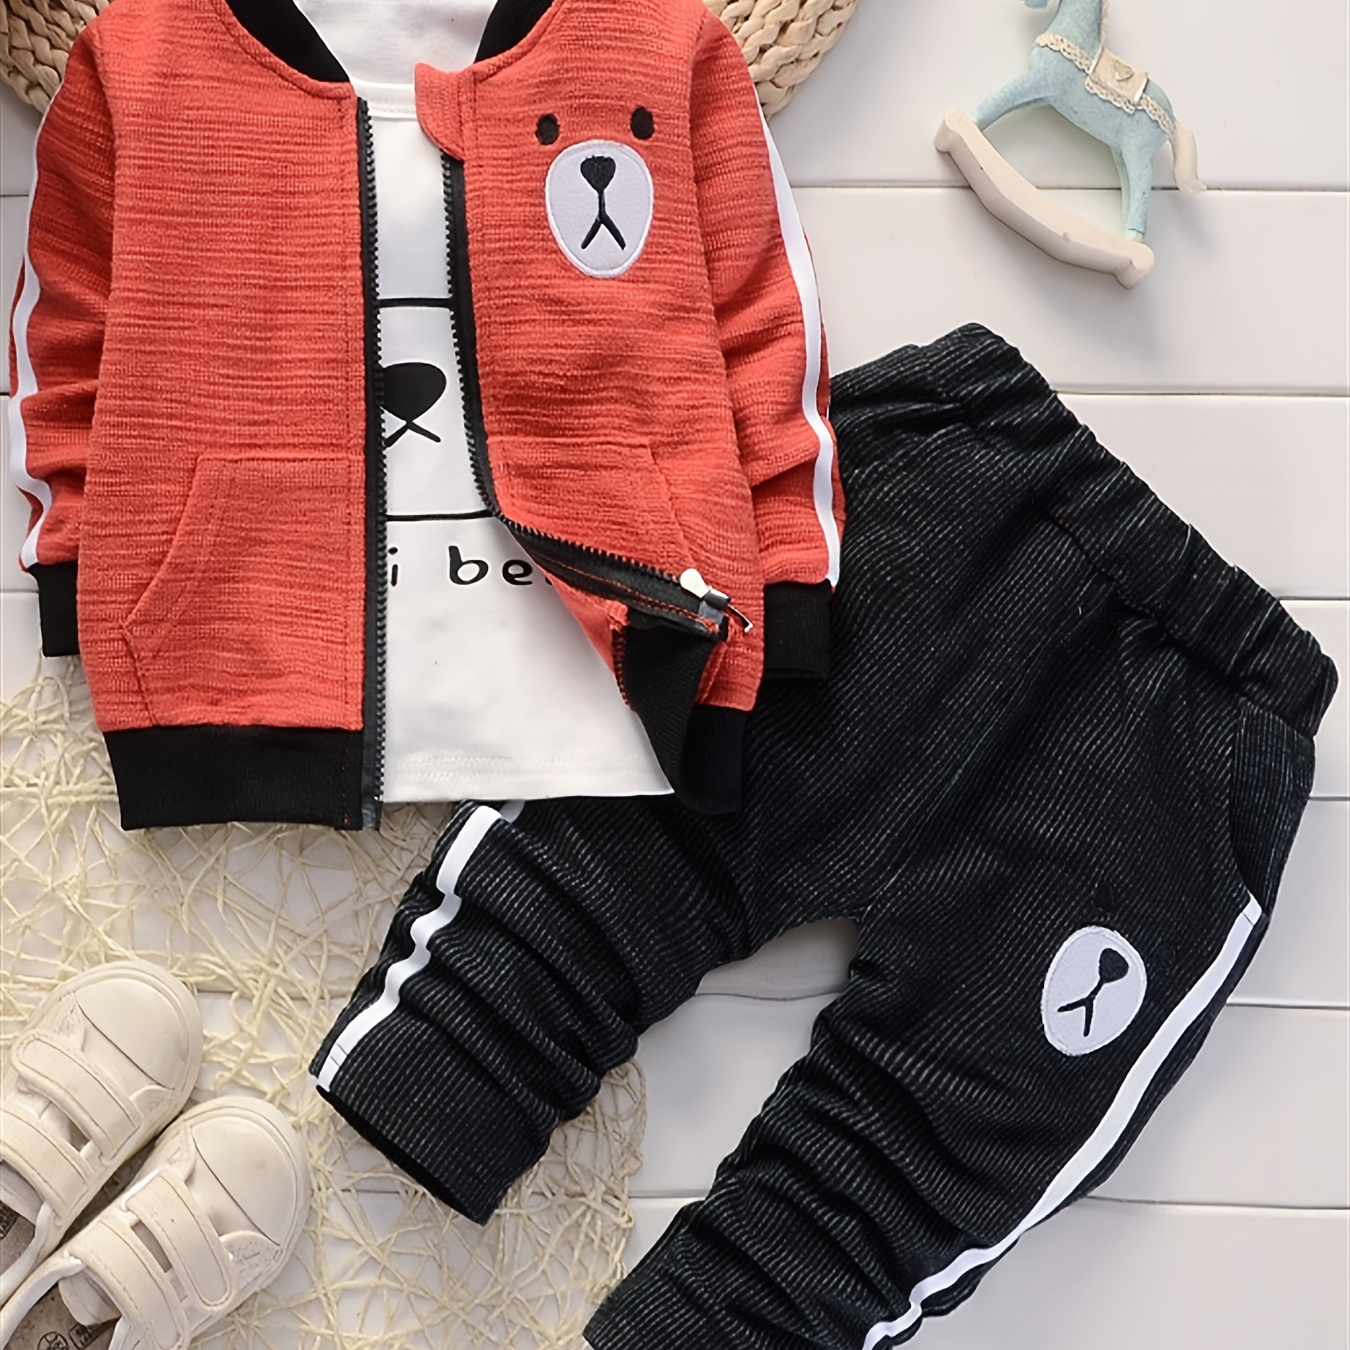 

3pcs Boy's Cartoon Bear Pattern Outfit, Corduroy Varsity Jacket & Long Sleeve Top & Pants Set, Casual Bomber Jacket, Toddler Kid's Clothes For Spring Fall, As Gift